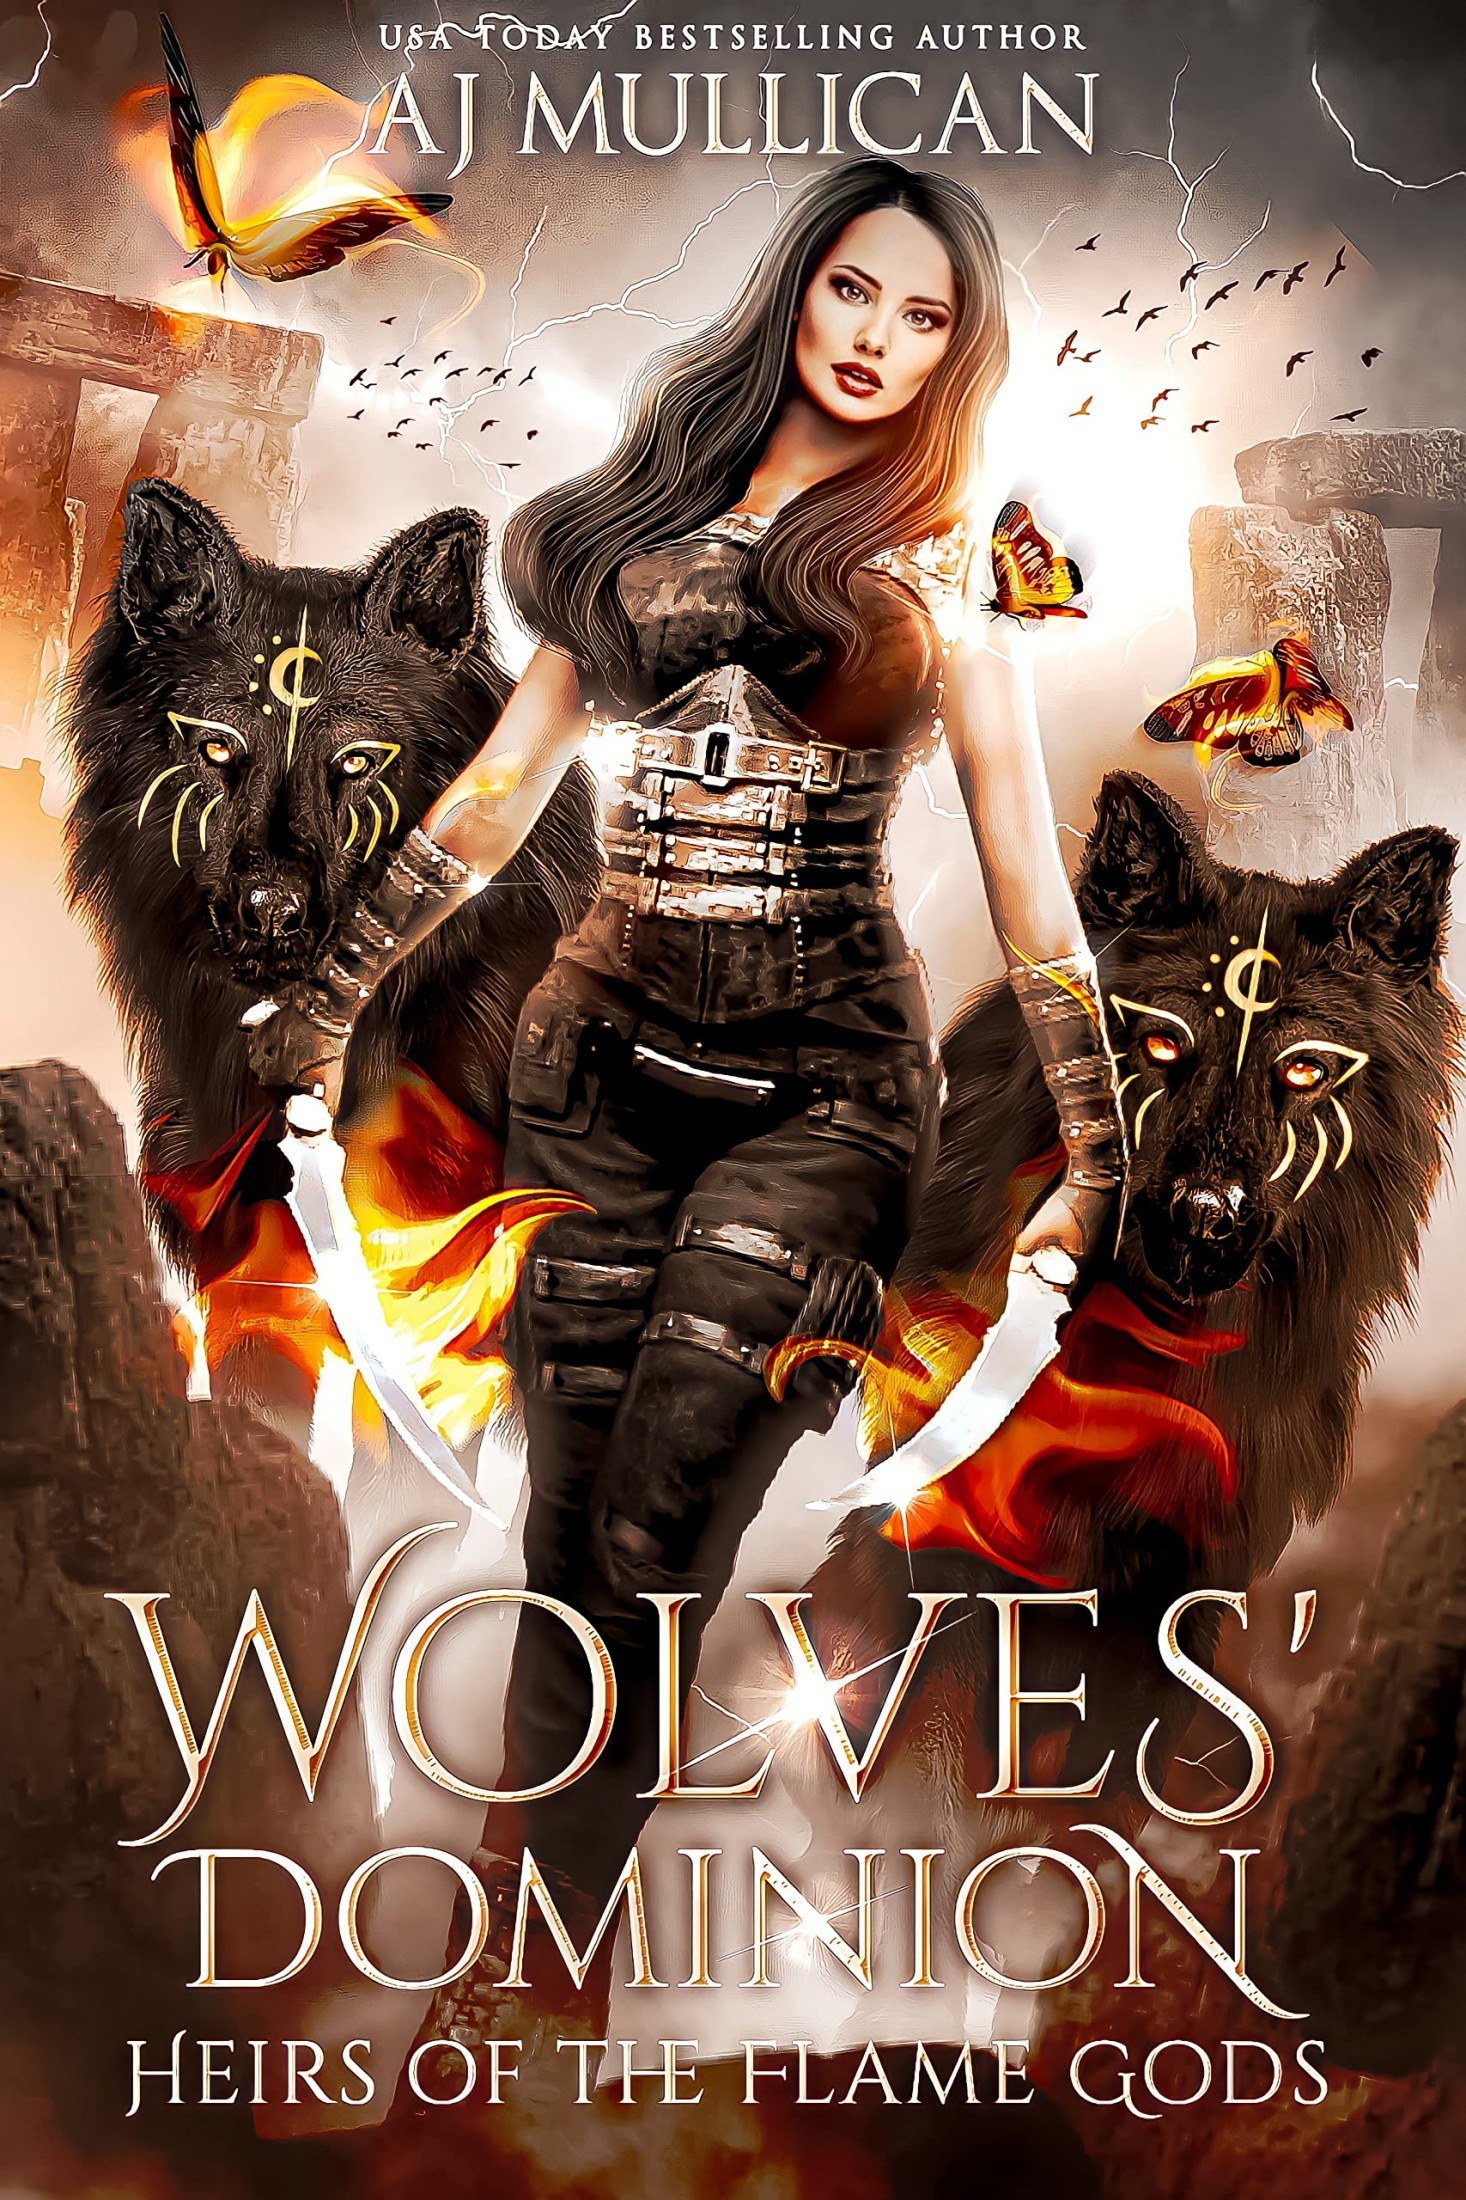 Wolves' Dominion